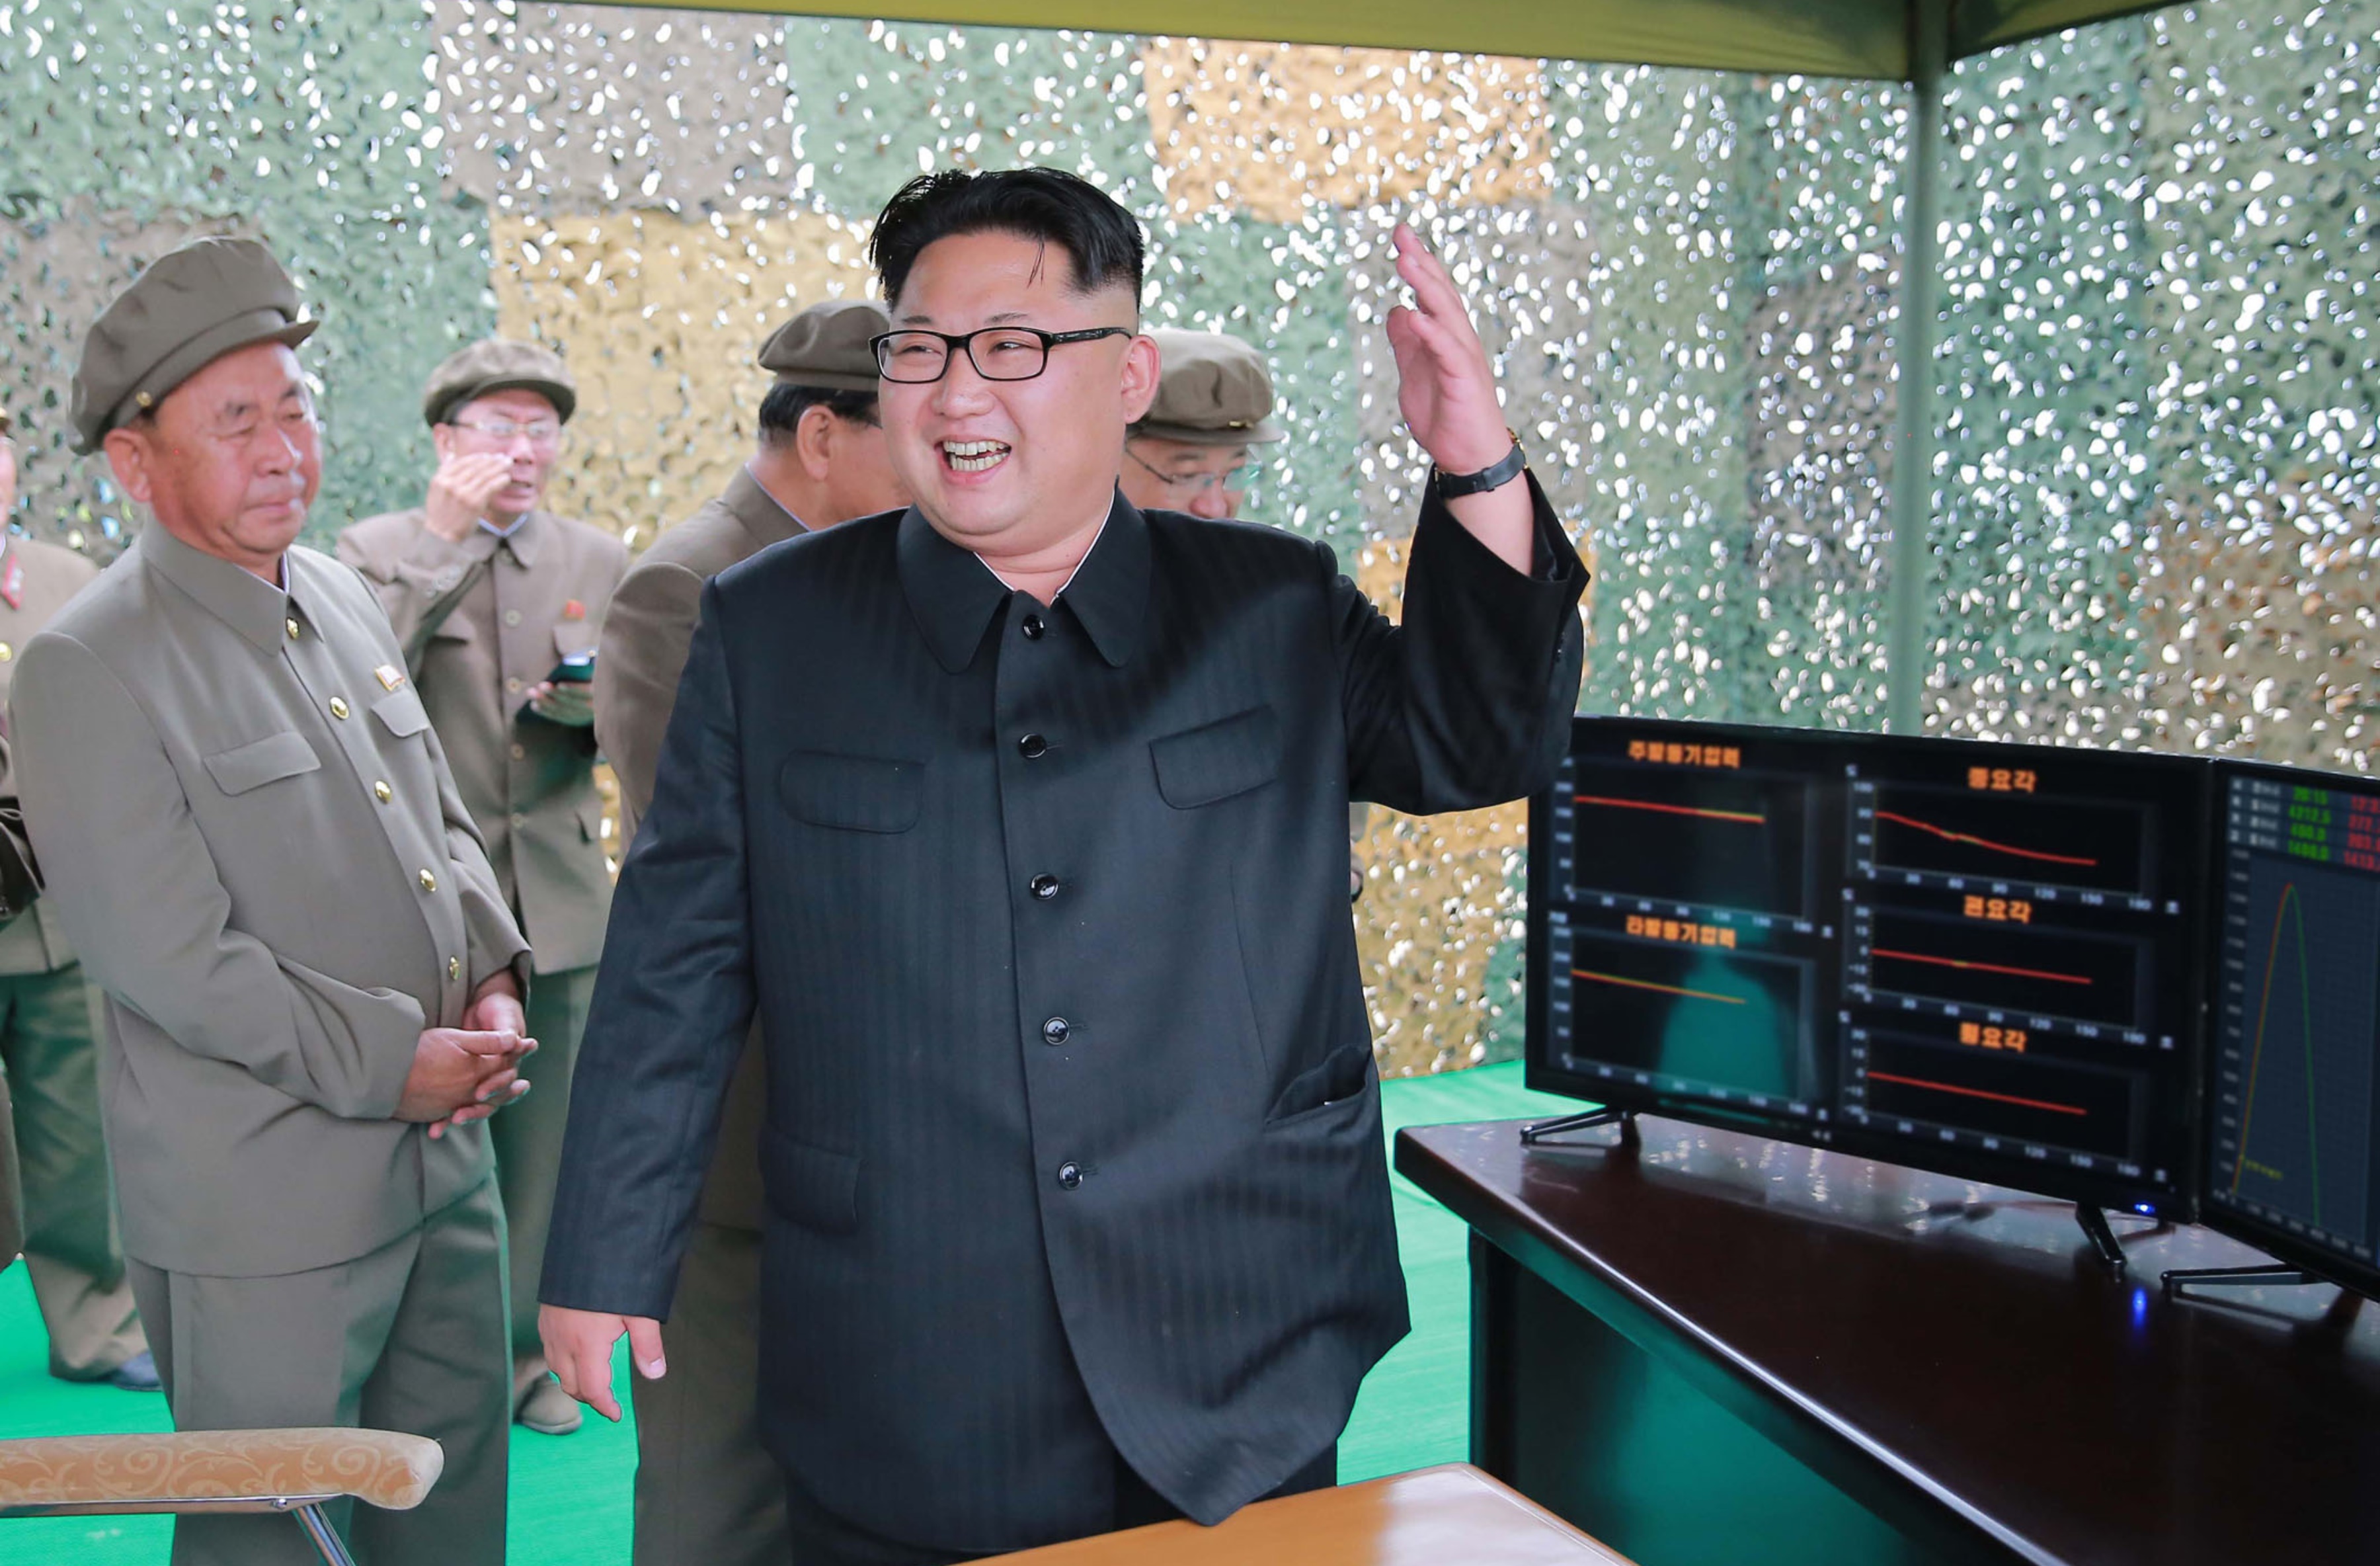 This undated picture released from North Korea's official Korean Central News Agency (KCNA) on June 23, 2016 shows North Korean leader Kim Jong-Un (C) inspecting a test of the surface-to-surface medium long-range strategic ballistic missile Hwasong-10 at an undisclosed location in North Korea. The Musudan -- also known as the Hwasong-10 -- has a theoretical range of anywhere between 2,500 and 4,000 kilometres (1,550 to 2,500 miles). / AFP PHOTO / KCNA VIA KNS / KCNA / South Korea OUT / REPUBLIC OF KOREA OUT   ---EDITORS NOTE--- RESTRICTED TO EDITORIAL USE - MANDATORY CREDIT "AFP PHOTO/KCNA VIA KNS" - NO MARKETING NO ADVERTISING CAMPAIGNS - DISTRIBUTED AS A SERVICE TO CLIENTS THIS PICTURE WAS MADE AVAILABLE BY A THIRD PARTY. AFP CAN NOT INDEPENDENTLY VERIFY THE AUTHENTICITY, LOCATION, DATE AND CONTENT OF THIS IMAGE. THIS PHOTO IS DISTRIBUTED EXACTLY AS RECEIVED BY AFP.  /